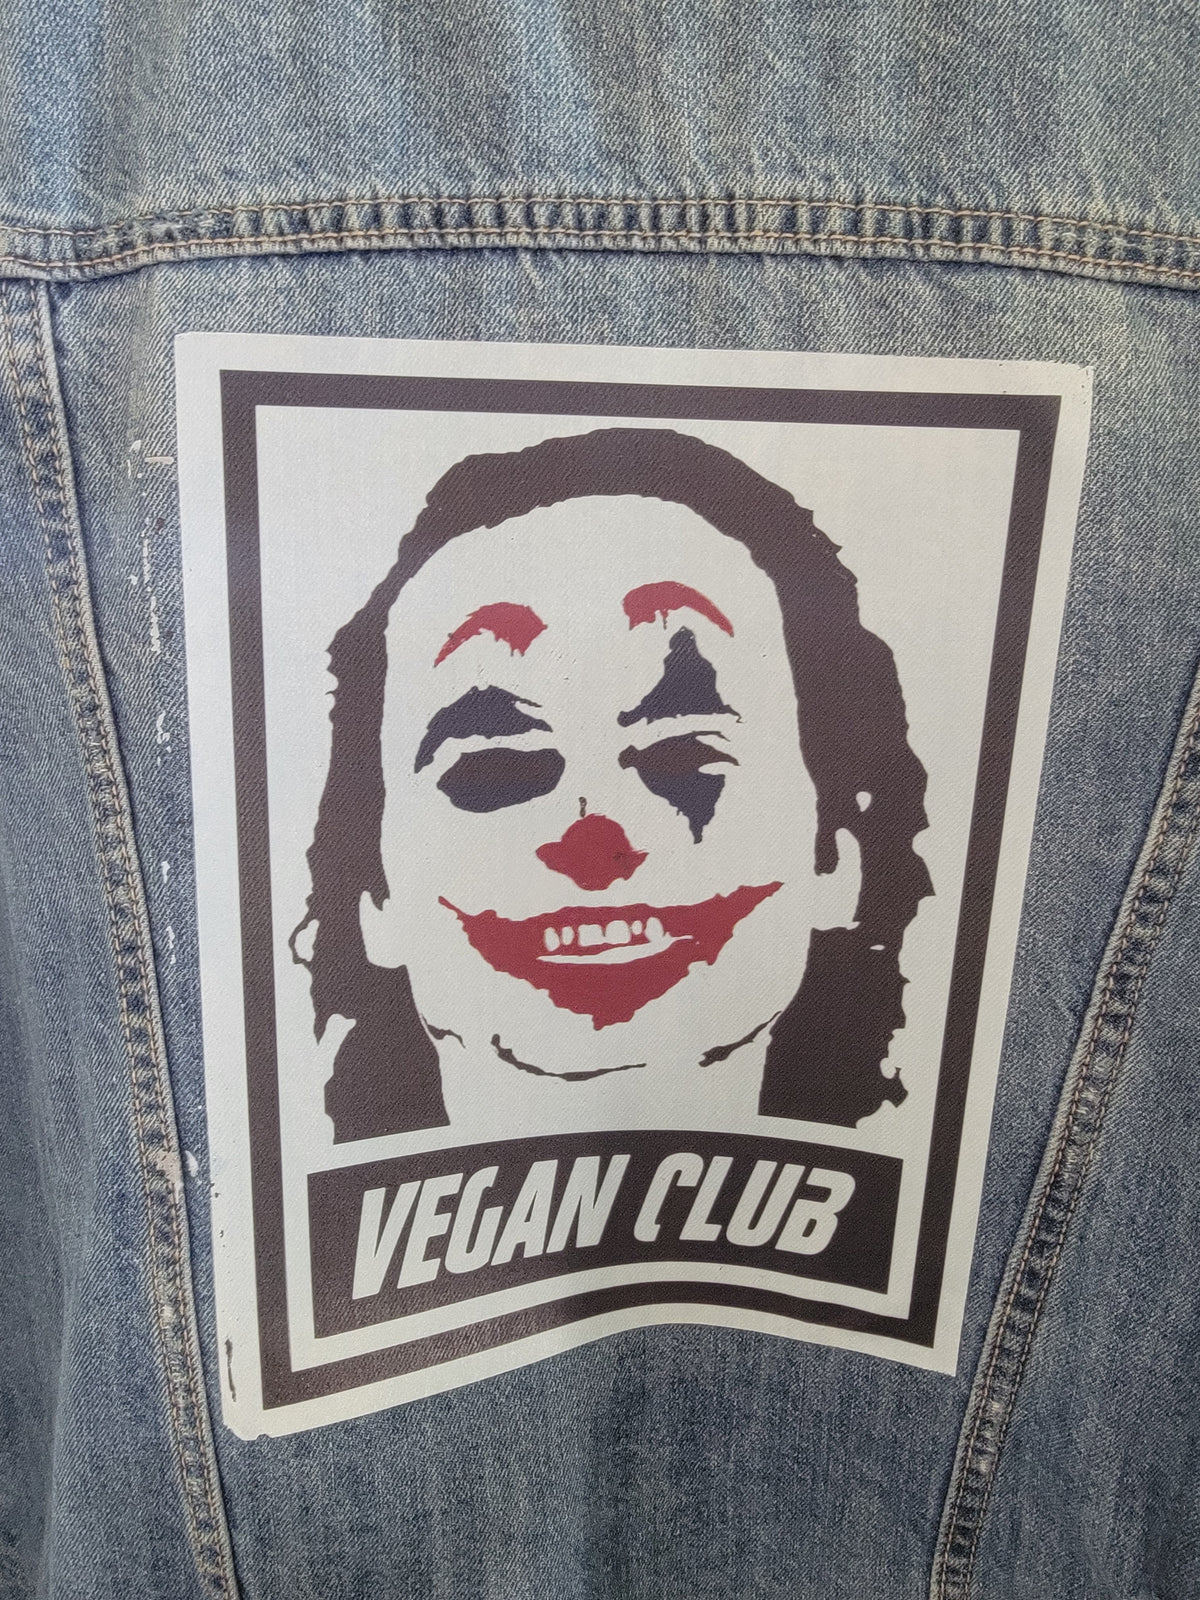 SOLD OUT - One of a Kind Upcycled Vegan Club Jean Jacket feat the Joker in color